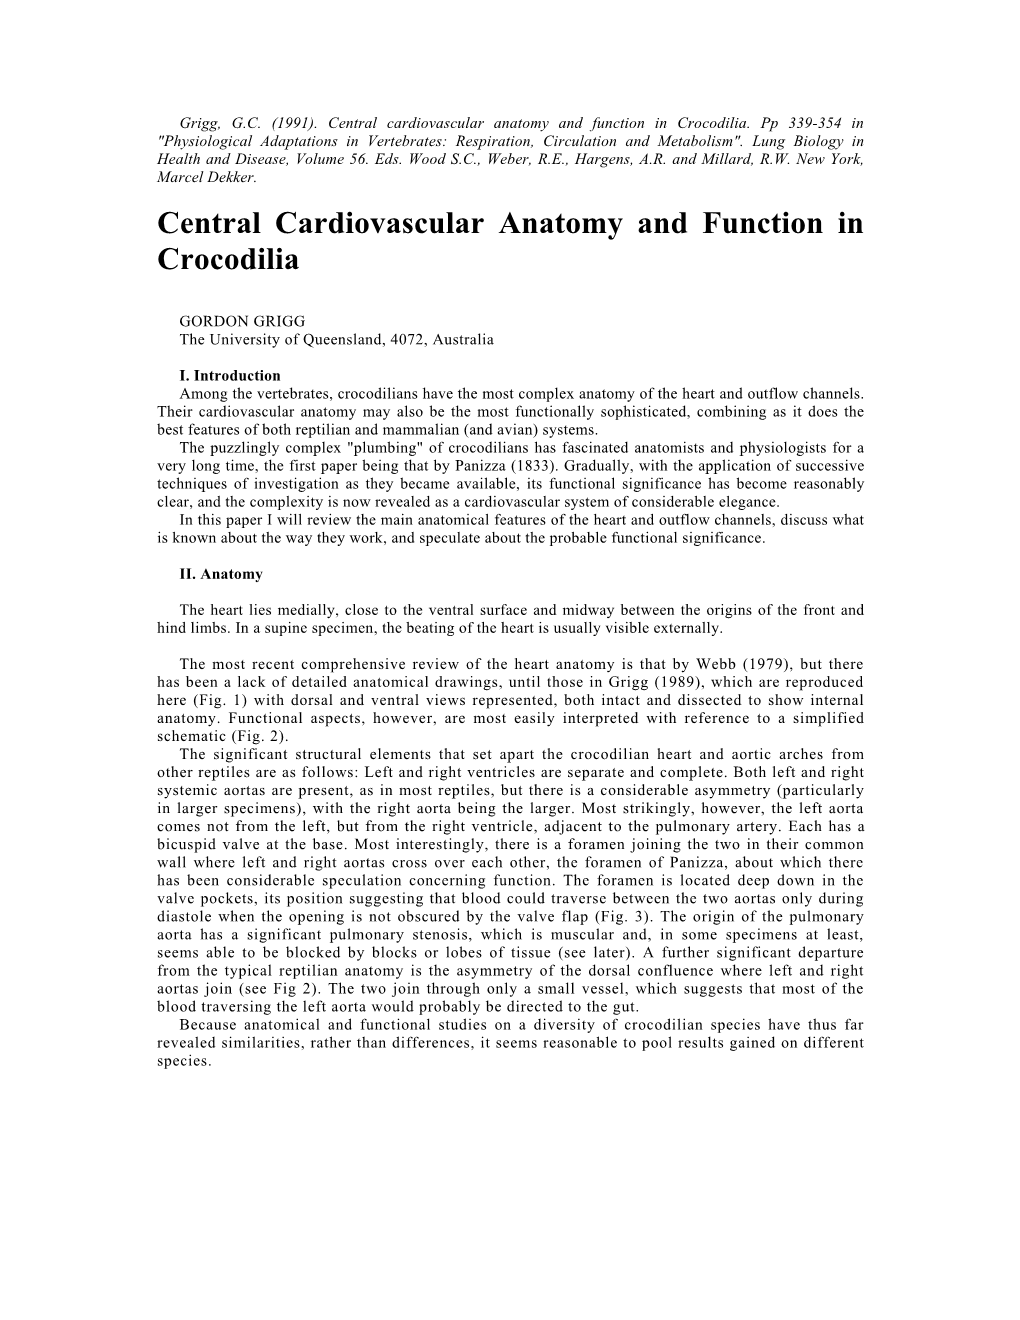 Central Cardiovascular Anatomy and Function in Crocodilia